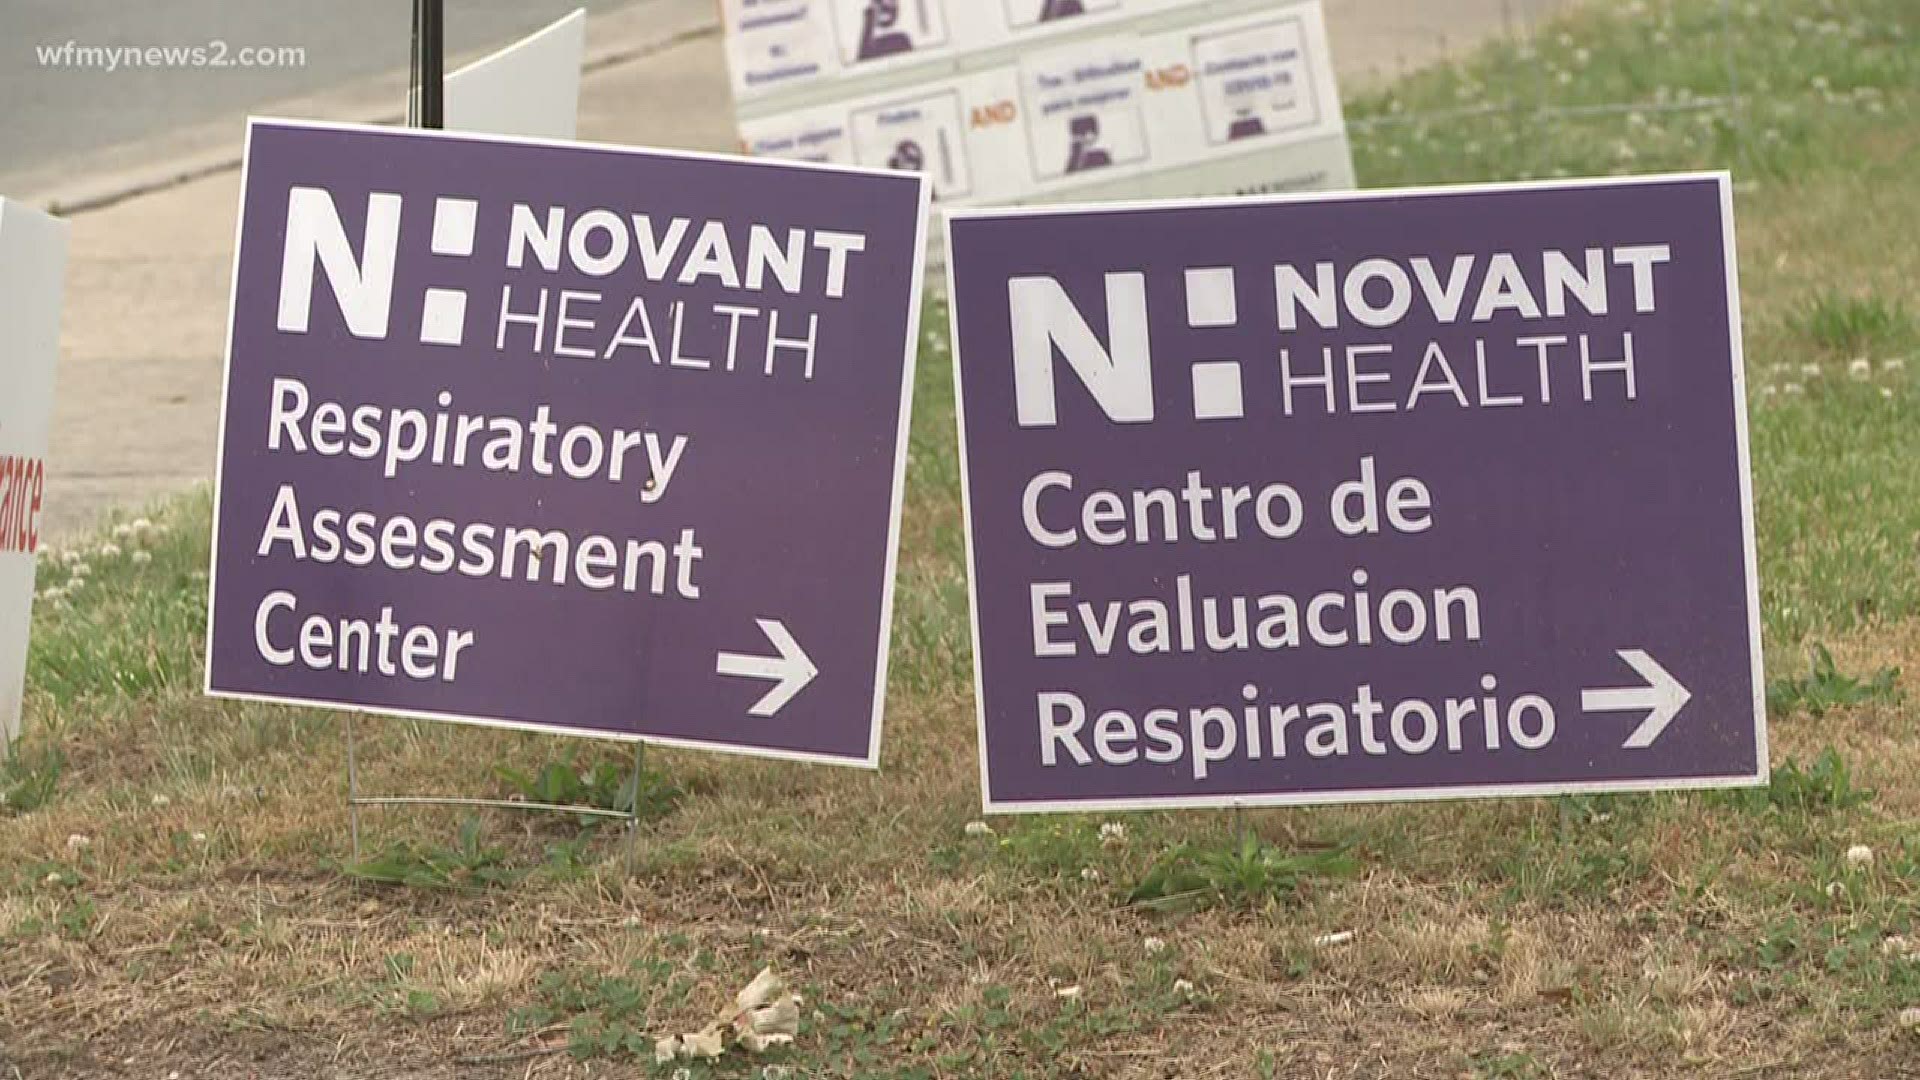 Novant Health reported the people coming up with the idea believe it's a better way to 'get it over with'.